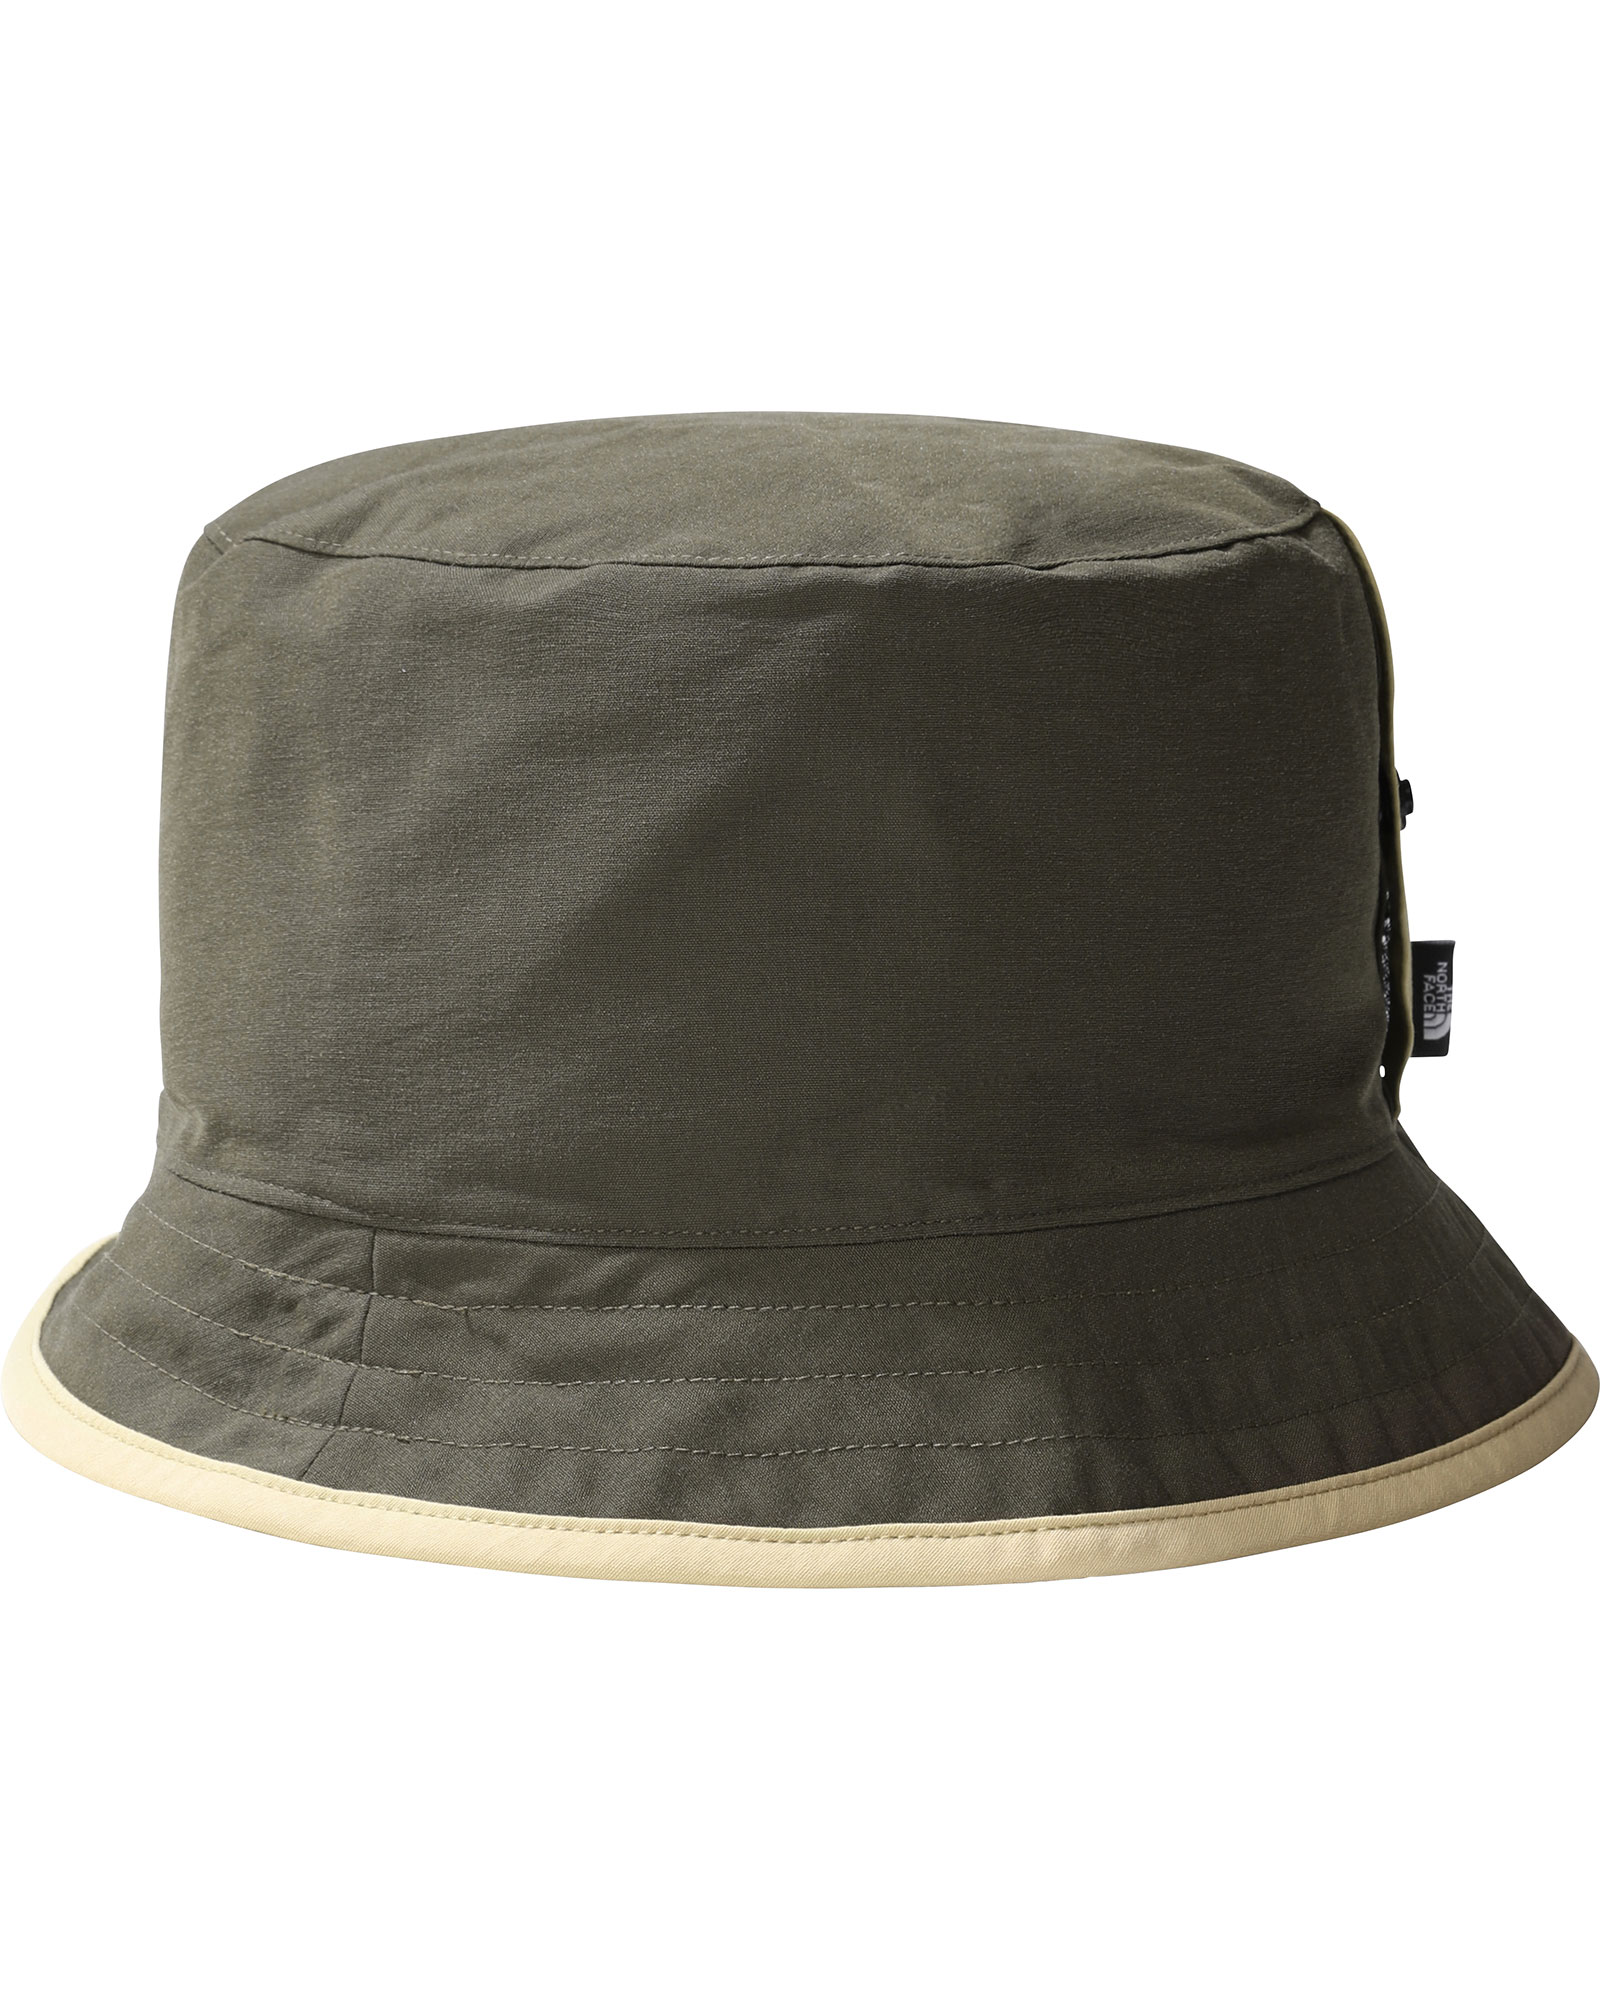 The North Face Class V Reversible Bucket Hat - New Taupe Green/Khaki L/XL